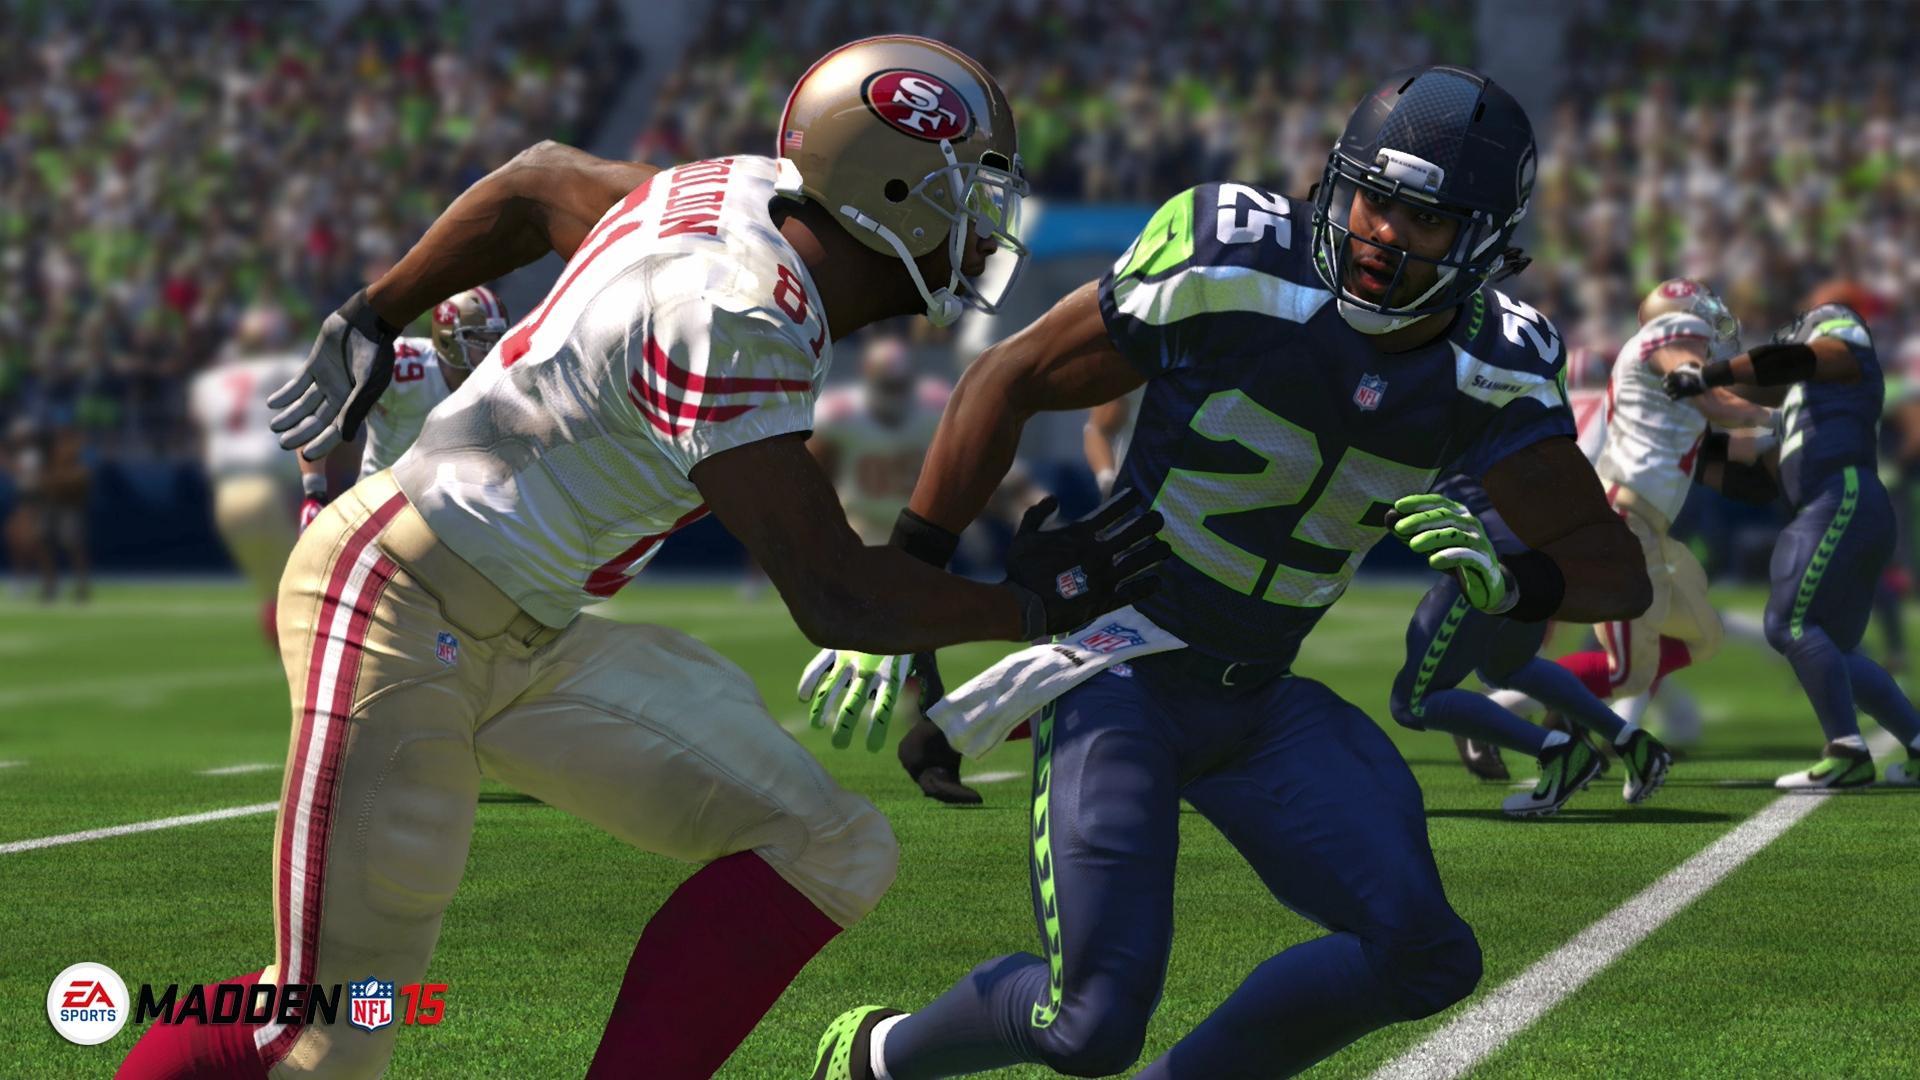 Download wallpaper 1920x1080 madden nfl game, players, sports HD